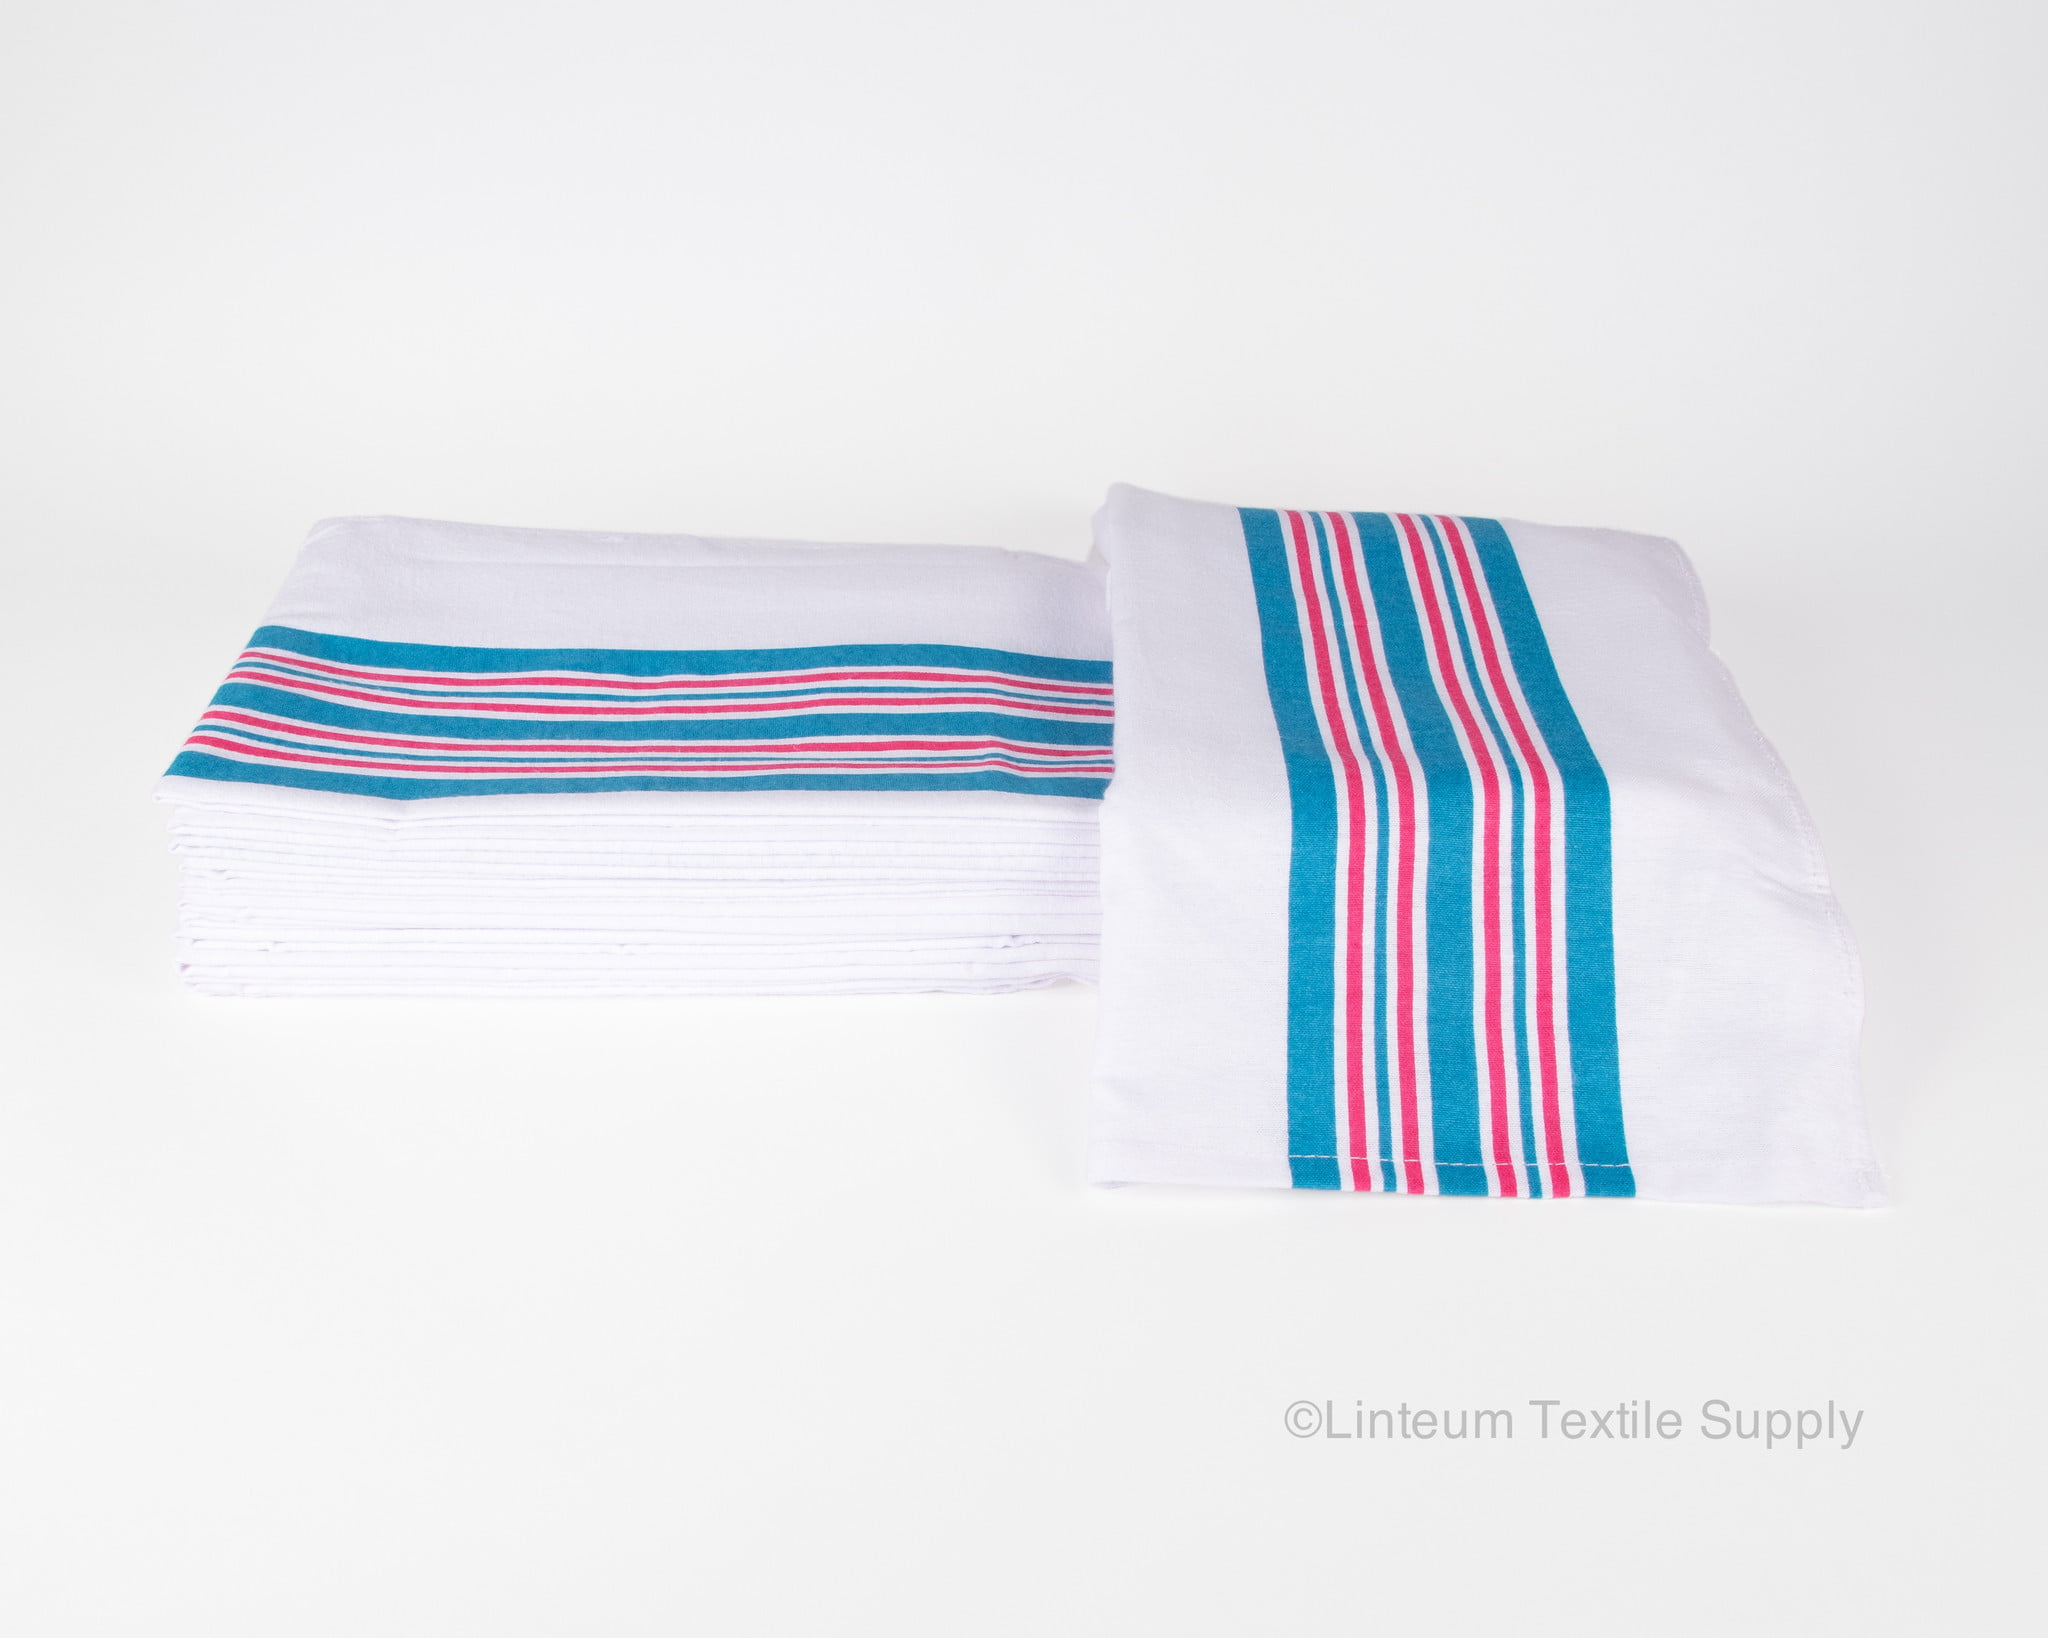 24 NEW BABY INFANT RECEIVING SWADDLING HOSPITAL BLANKETS LARGE 30''X40'' STRIPED 